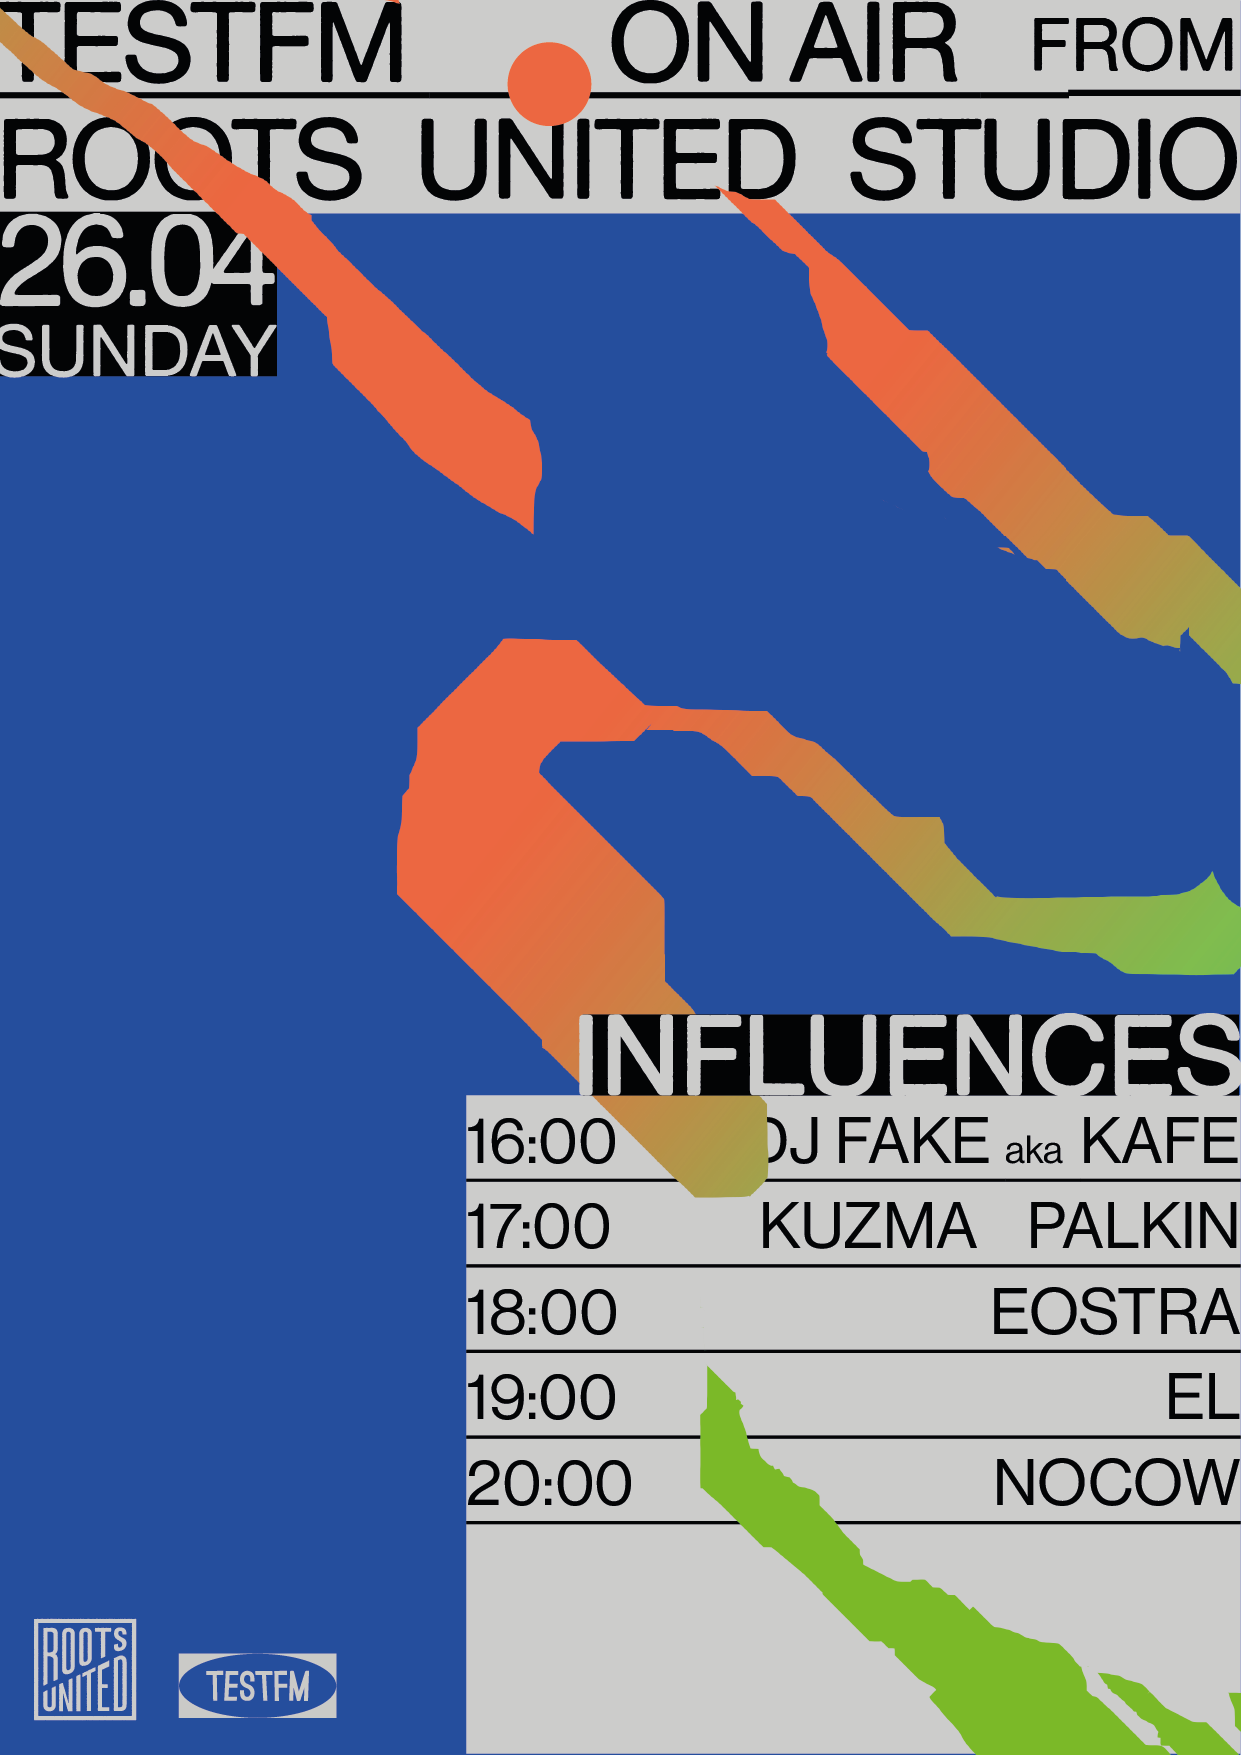 INFLUENCES. TEST FM FROM ROOTS UNITED STUDIO LIVESTREAM